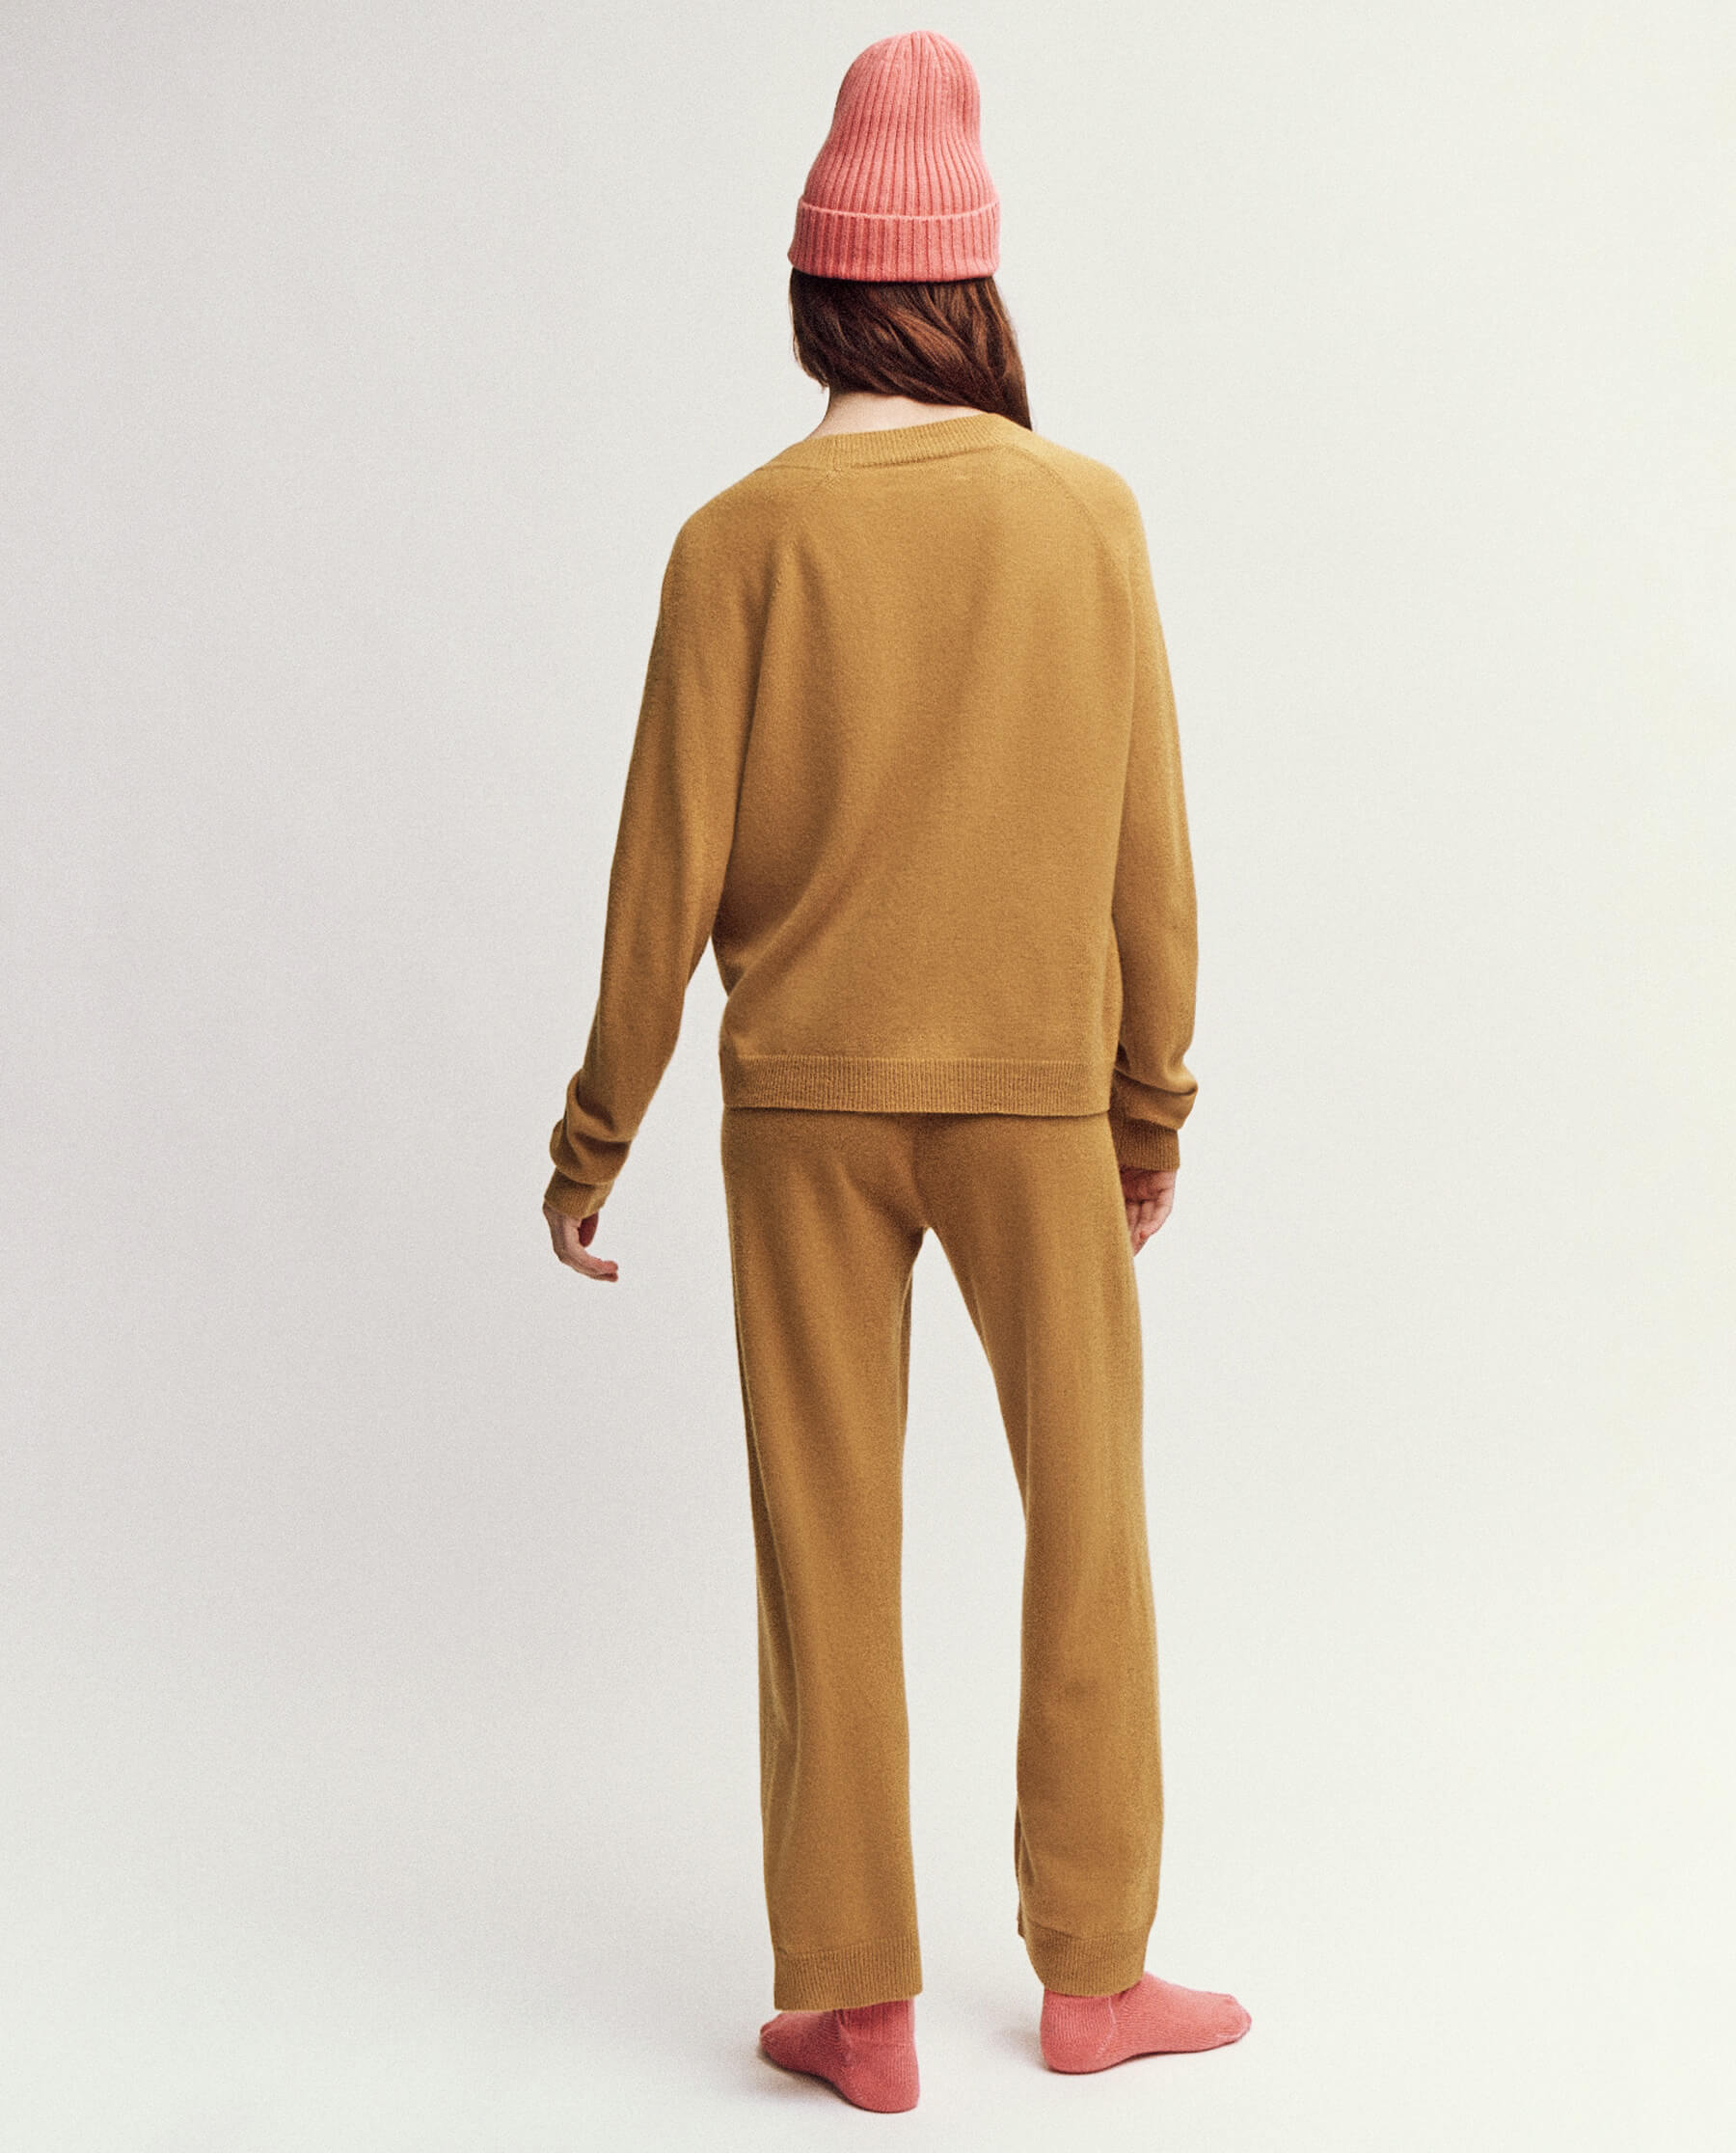 The Lantern Pant. -- Marigold BOTTOMS THE GREAT. HOL 22 D2 CASHMERE